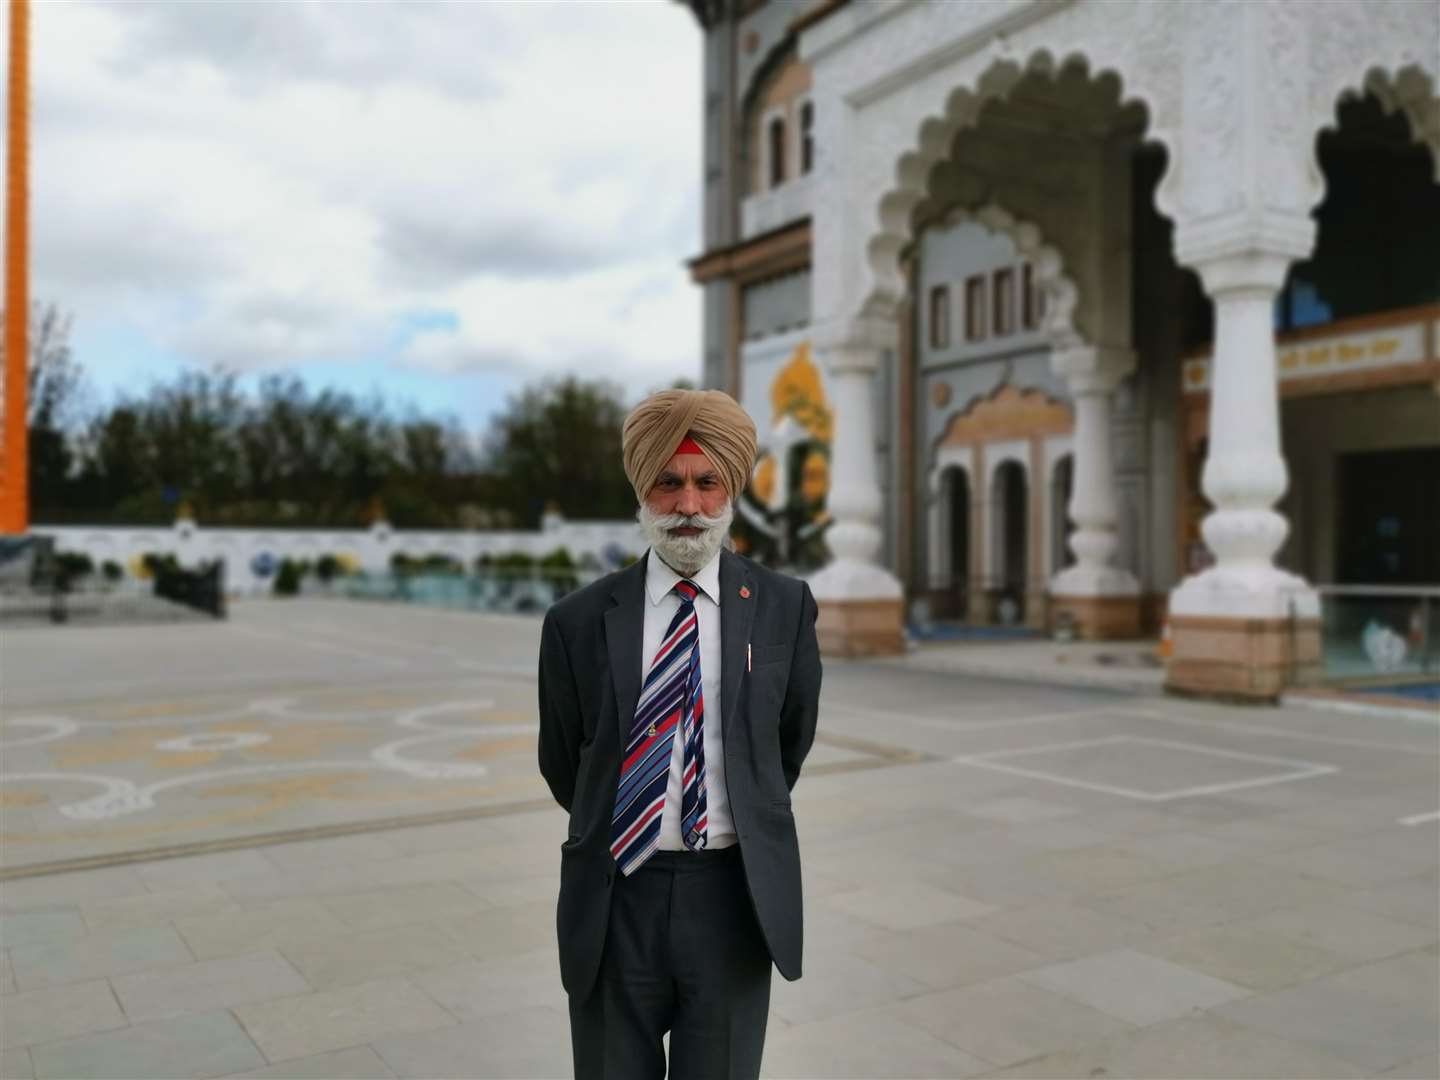 Nanak Singh, vice president of the gurdwara, is scared for his mum's health